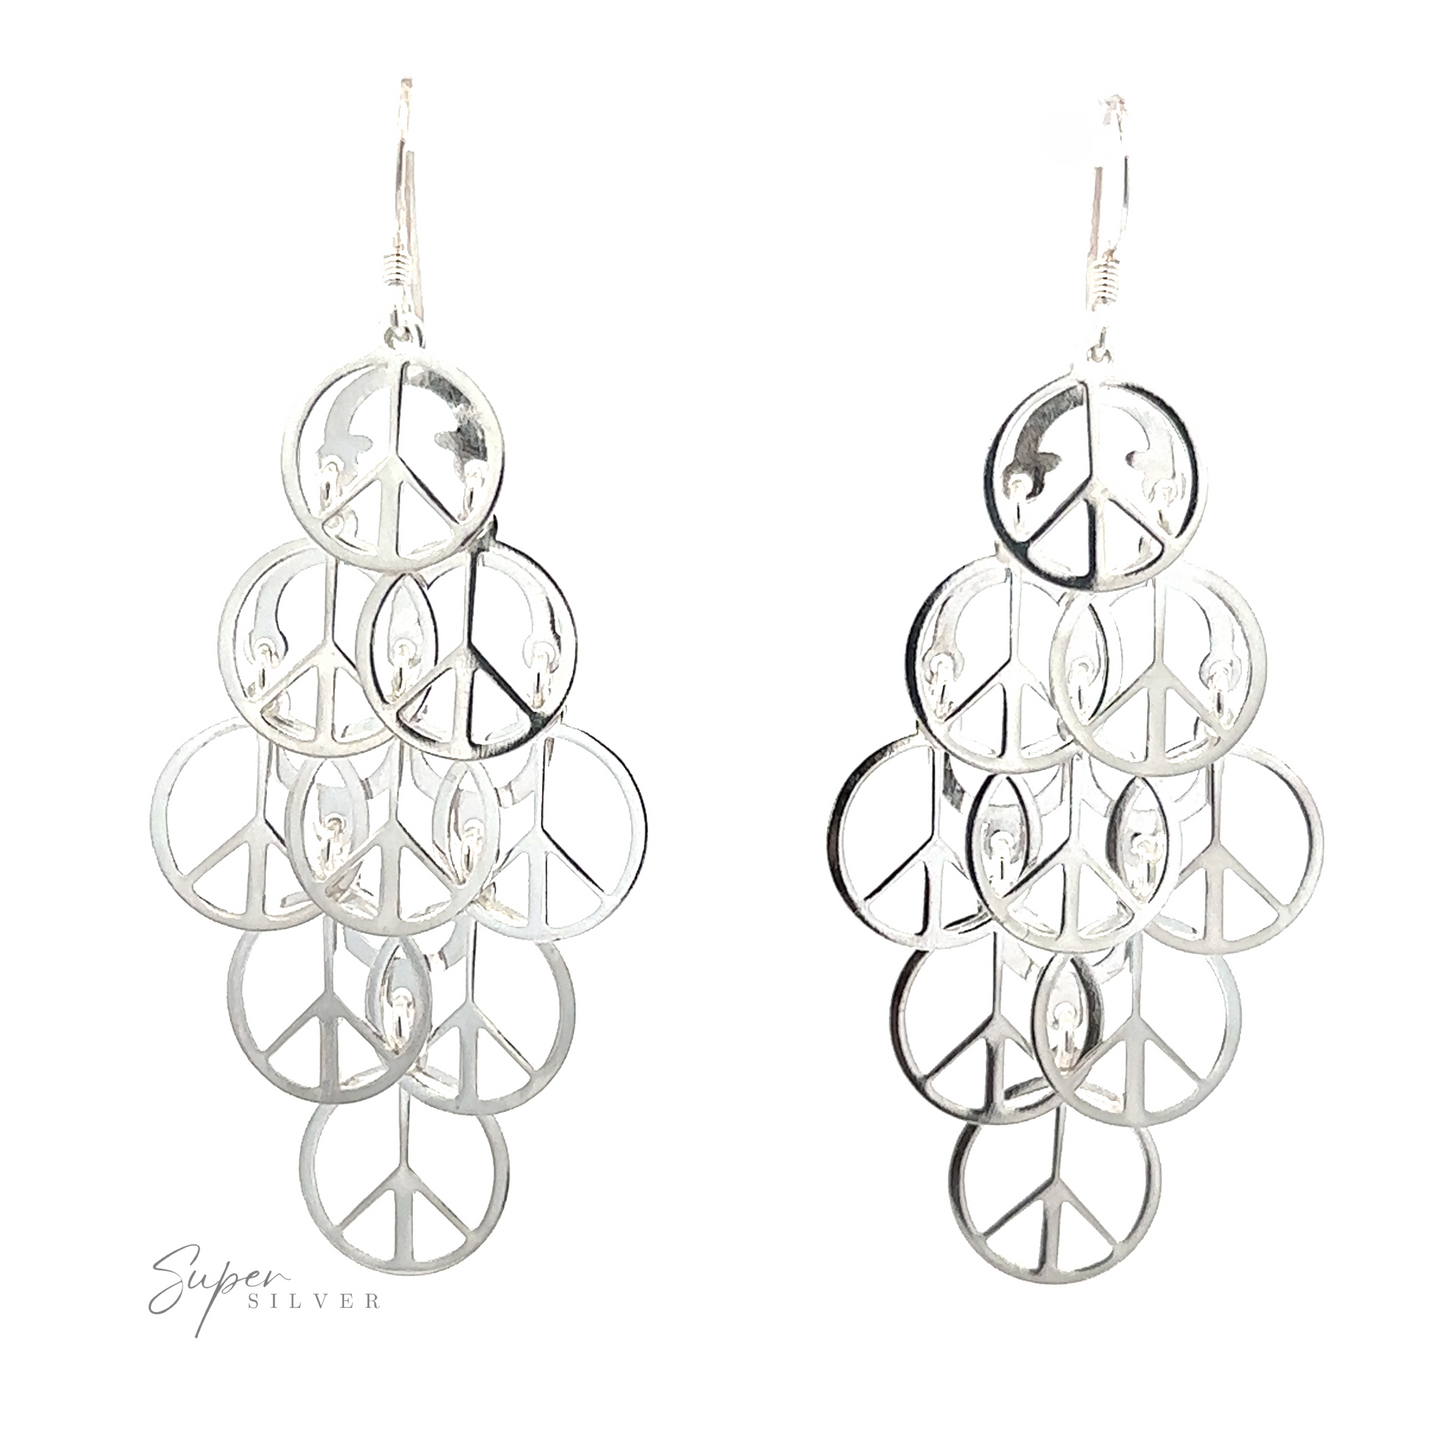 A pair of Layered Peace Sign Earrings with multiple interlocking circular designs, displayed against a white background with the text "super silver.